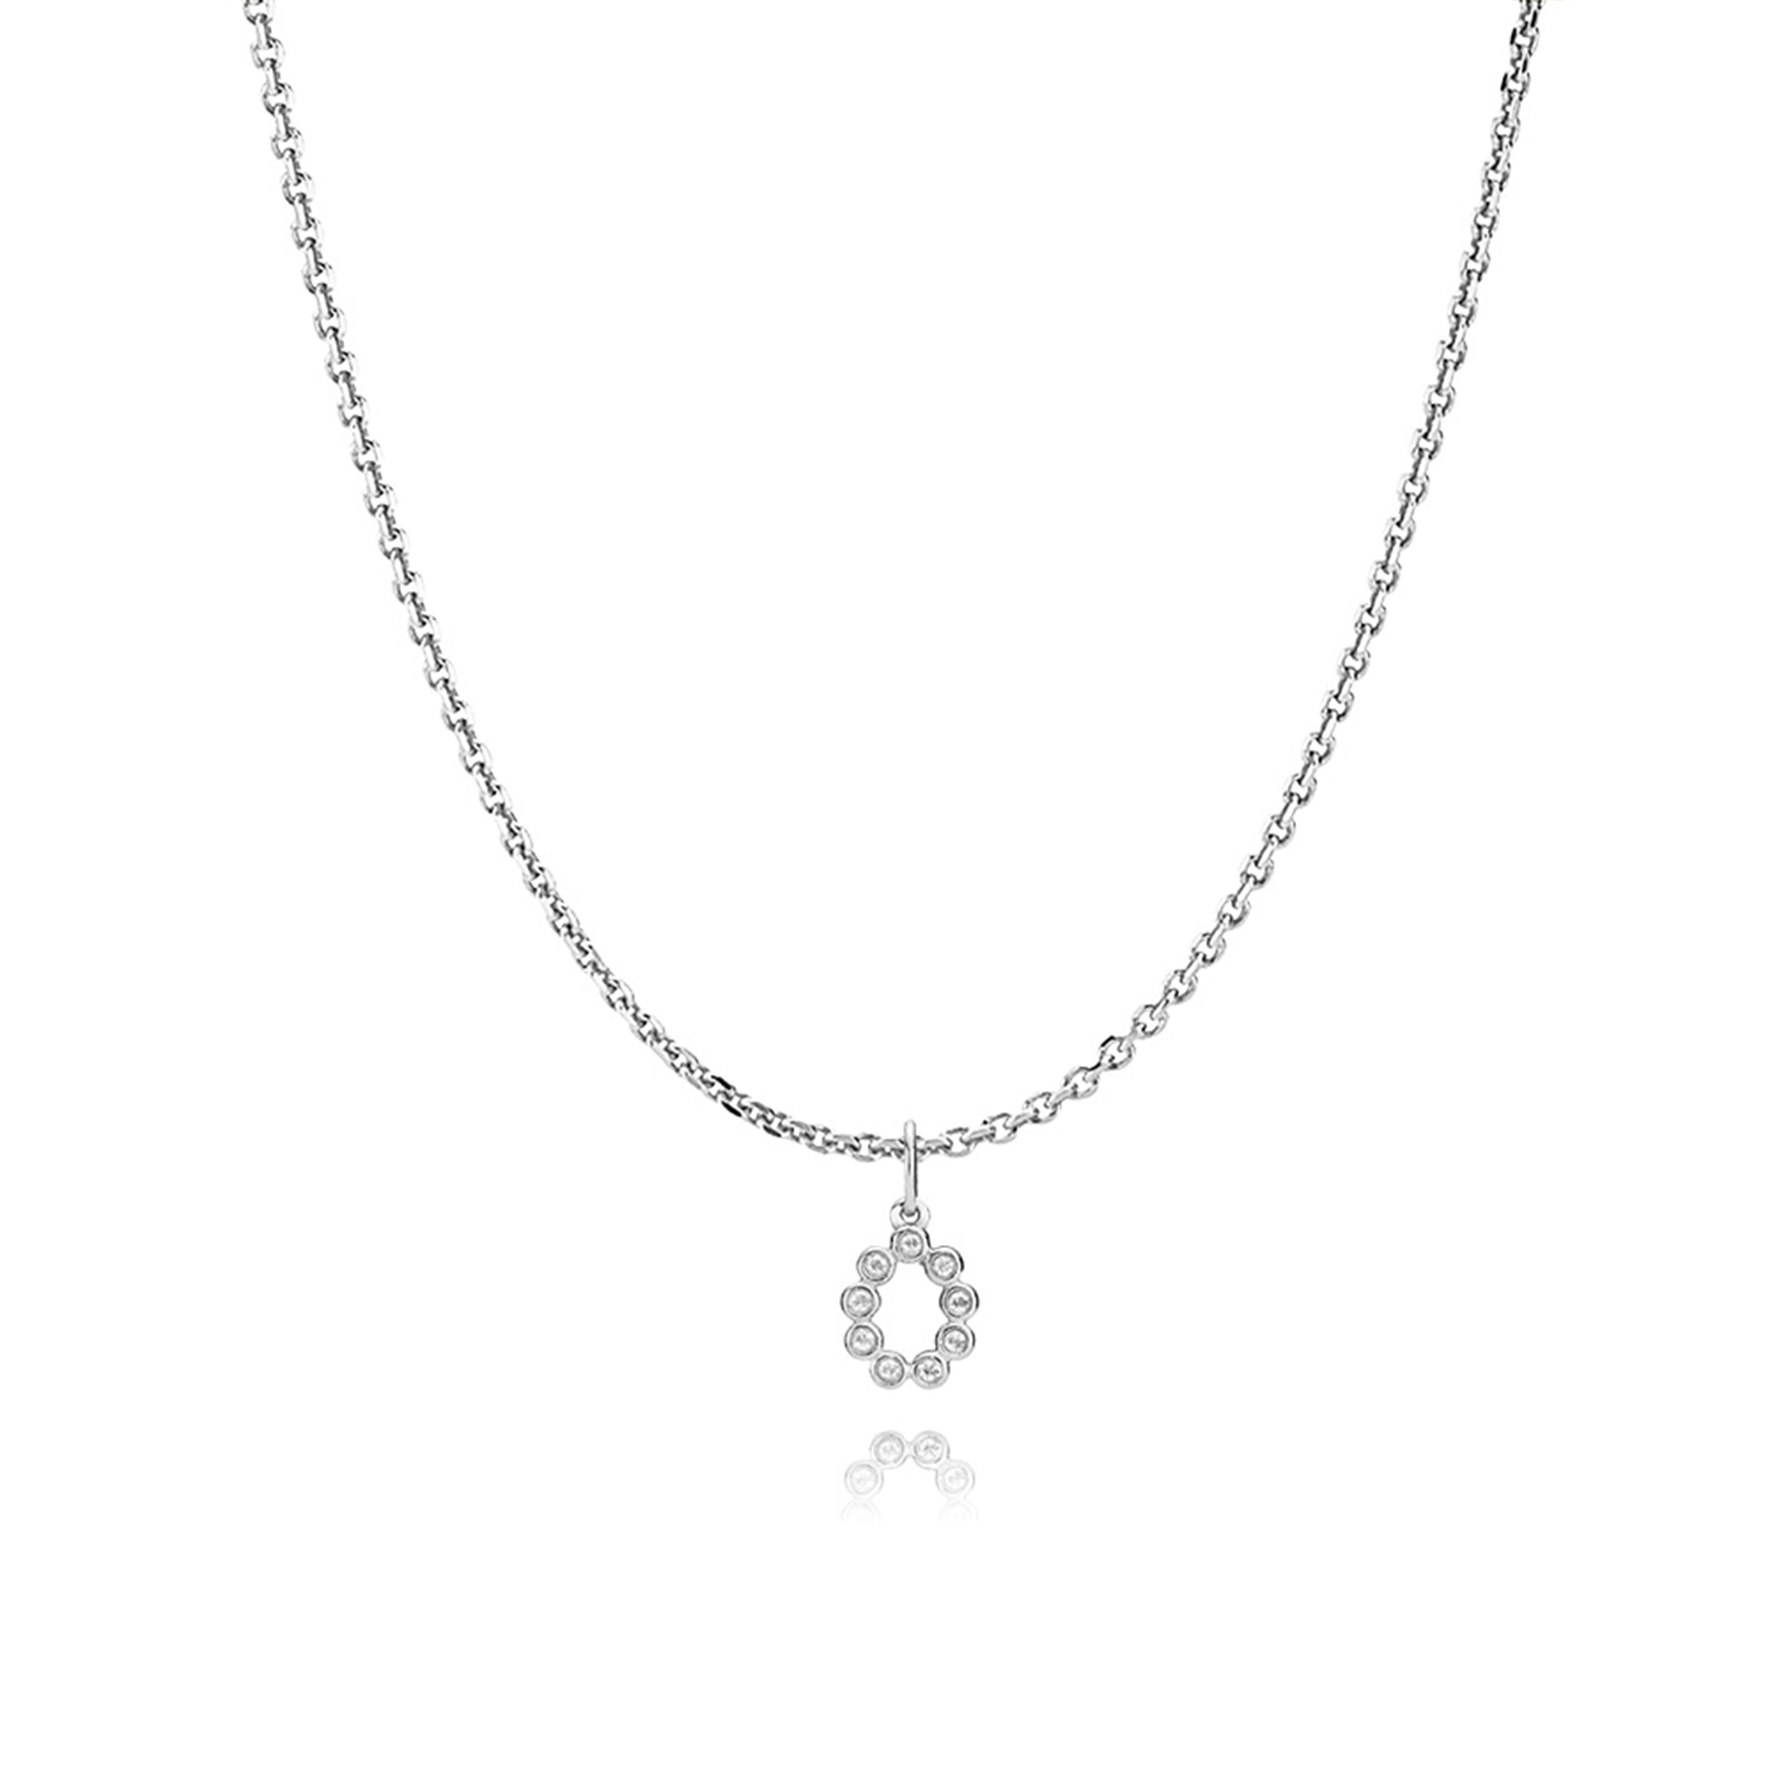 Leonora Necklace from Izabel Camille in Silver Sterling 925